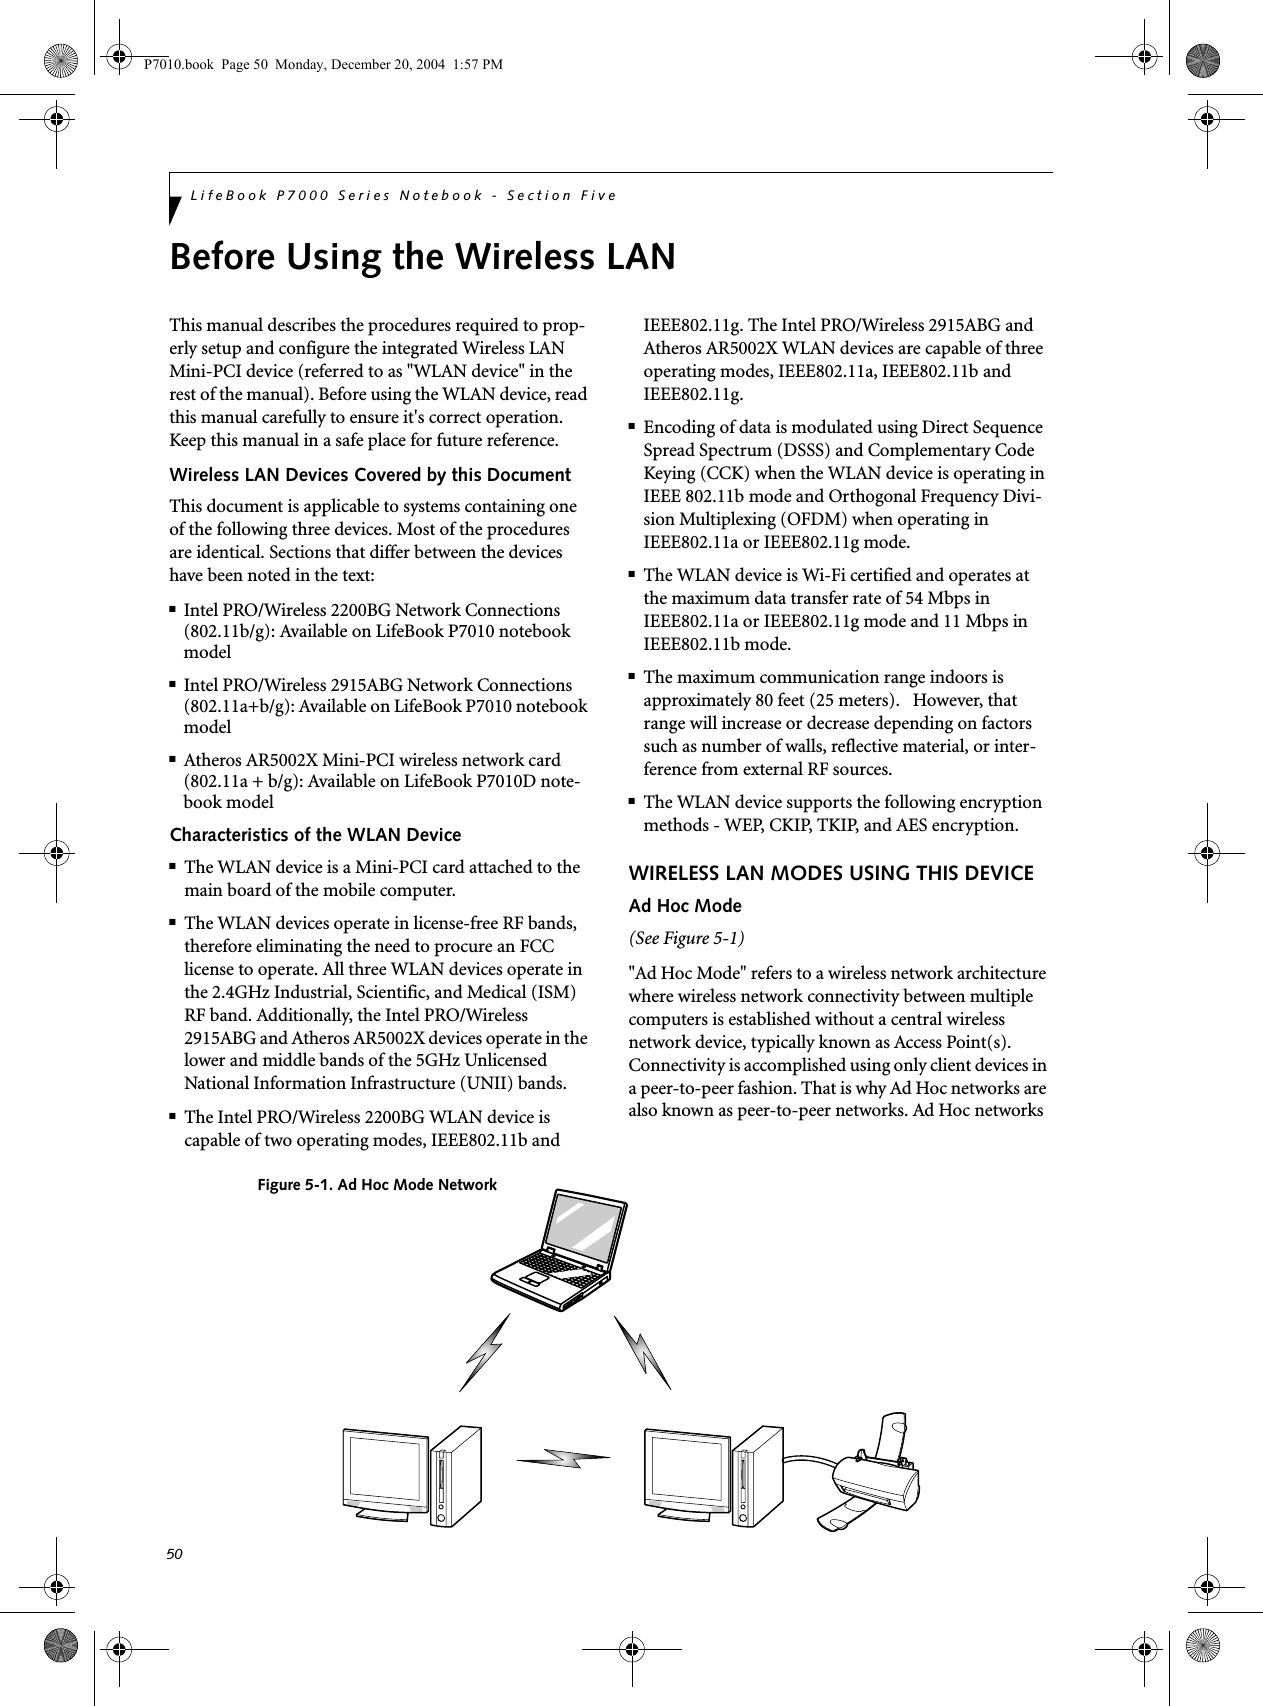 50LifeBook P7000 Series Notebook - Section FiveBefore Using the Wireless LANThis manual describes the procedures required to prop-erly setup and configure the integrated Wireless LAN Mini-PCI device (referred to as &quot;WLAN device&quot; in the rest of the manual). Before using the WLAN device, read this manual carefully to ensure it&apos;s correct operation. Keep this manual in a safe place for future reference.Wireless LAN Devices Covered by this DocumentThis document is applicable to systems containing one of the following three devices. Most of the procedures are identical. Sections that differ between the devices have been noted in the text:■Intel PRO/Wireless 2200BG Network Connections (802.11b/g): Available on LifeBook P7010 notebook model■Intel PRO/Wireless 2915ABG Network Connections (802.11a+b/g): Available on LifeBook P7010 notebook model■Atheros AR5002X Mini-PCI wireless network card (802.11a + b/g): Available on LifeBook P7010D note-book modelCharacteristics of the WLAN Device■The WLAN device is a Mini-PCI card attached to the main board of the mobile computer. ■The WLAN devices operate in license-free RF bands, therefore eliminating the need to procure an FCC license to operate. All three WLAN devices operate in the 2.4GHz Industrial, Scientific, and Medical (ISM) RF band. Additionally, the Intel PRO/Wireless 2915ABG and Atheros AR5002X devices operate in the lower and middle bands of the 5GHz Unlicensed National Information Infrastructure (UNII) bands. ■The Intel PRO/Wireless 2200BG WLAN device is capable of two operating modes, IEEE802.11b and IEEE802.11g. The Intel PRO/Wireless 2915ABG and Atheros AR5002X WLAN devices are capable of three operating modes, IEEE802.11a, IEEE802.11b and IEEE802.11g. ■Encoding of data is modulated using Direct Sequence Spread Spectrum (DSSS) and Complementary Code Keying (CCK) when the WLAN device is operating in IEEE 802.11b mode and Orthogonal Frequency Divi-sion Multiplexing (OFDM) when operating in IEEE802.11a or IEEE802.11g mode. ■The WLAN device is Wi-Fi certified and operates at the maximum data transfer rate of 54 Mbps in IEEE802.11a or IEEE802.11g mode and 11 Mbps in IEEE802.11b mode.■The maximum communication range indoors is approximately 80 feet (25 meters).   However, that range will increase or decrease depending on factors such as number of walls, reflective material, or inter-ference from external RF sources.■The WLAN device supports the following encryption methods - WEP, CKIP, TKIP, and AES encryption.WIRELESS LAN MODES USING THIS DEVICEAd Hoc Mode (See Figure 5-1)&quot;Ad Hoc Mode&quot; refers to a wireless network architecture where wireless network connectivity between multiple computers is established without a central wireless network device, typically known as Access Point(s). Connectivity is accomplished using only client devices in a peer-to-peer fashion. That is why Ad Hoc networks are also known as peer-to-peer networks. Ad Hoc networks Figure 5-1. Ad Hoc Mode NetworkP7010.book  Page 50  Monday, December 20, 2004  1:57 PM